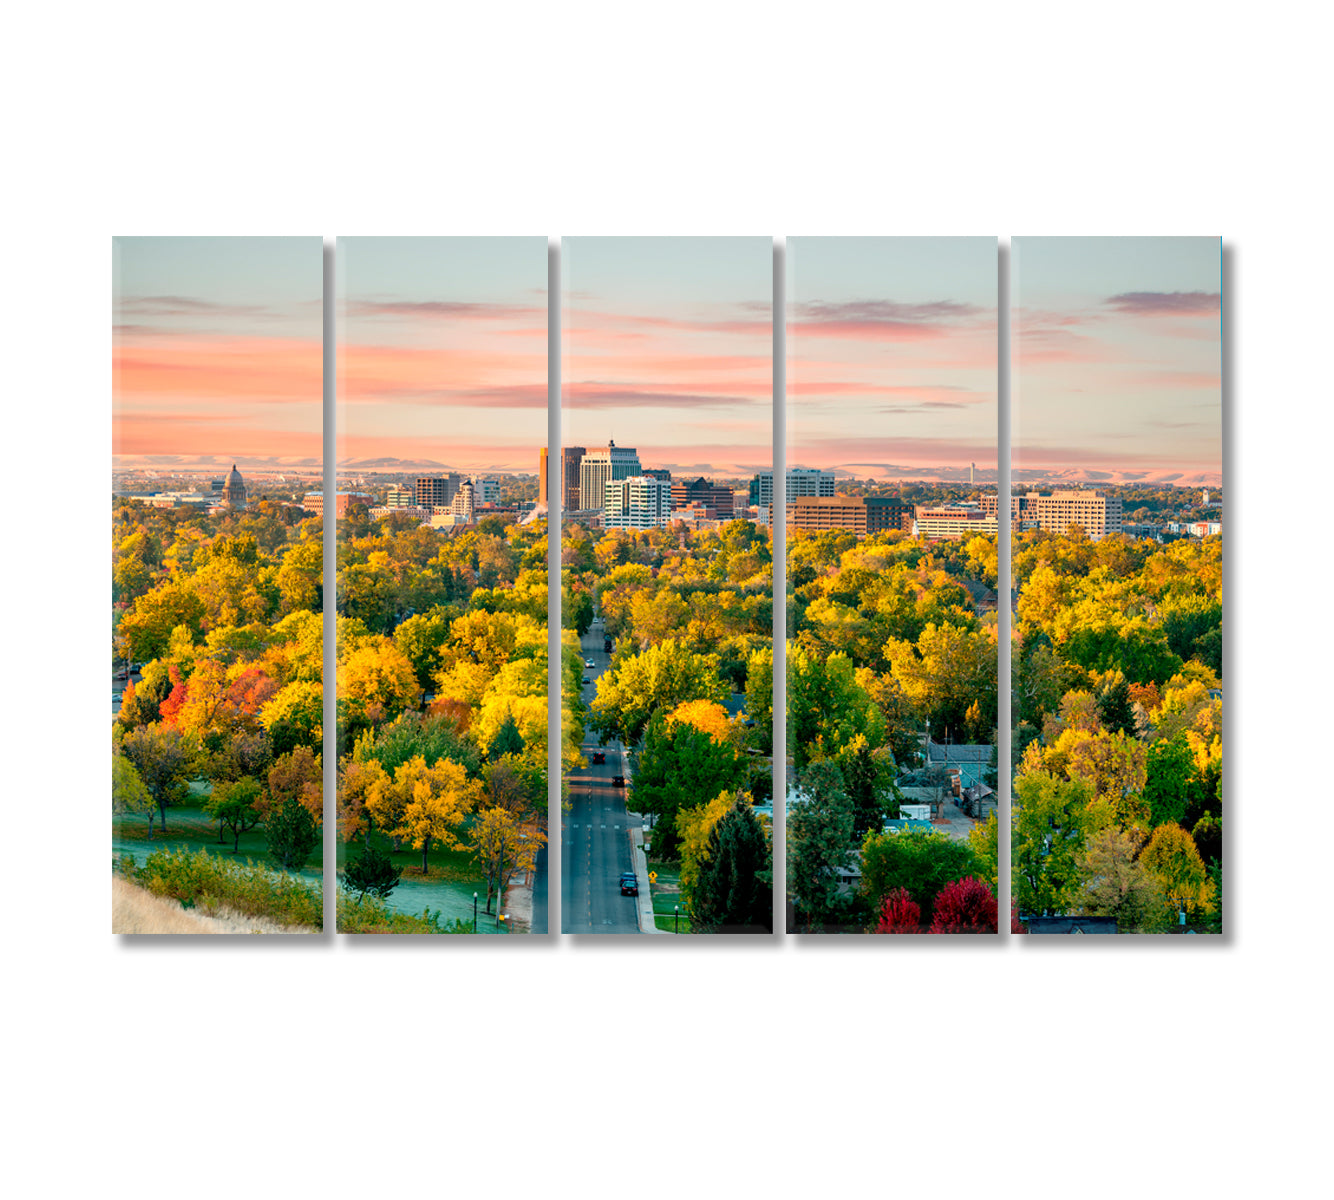 City of Trees Boise Idaho in the Fall Canvas Print-Canvas Print-CetArt-5 Panels-36x24 inches-CetArt